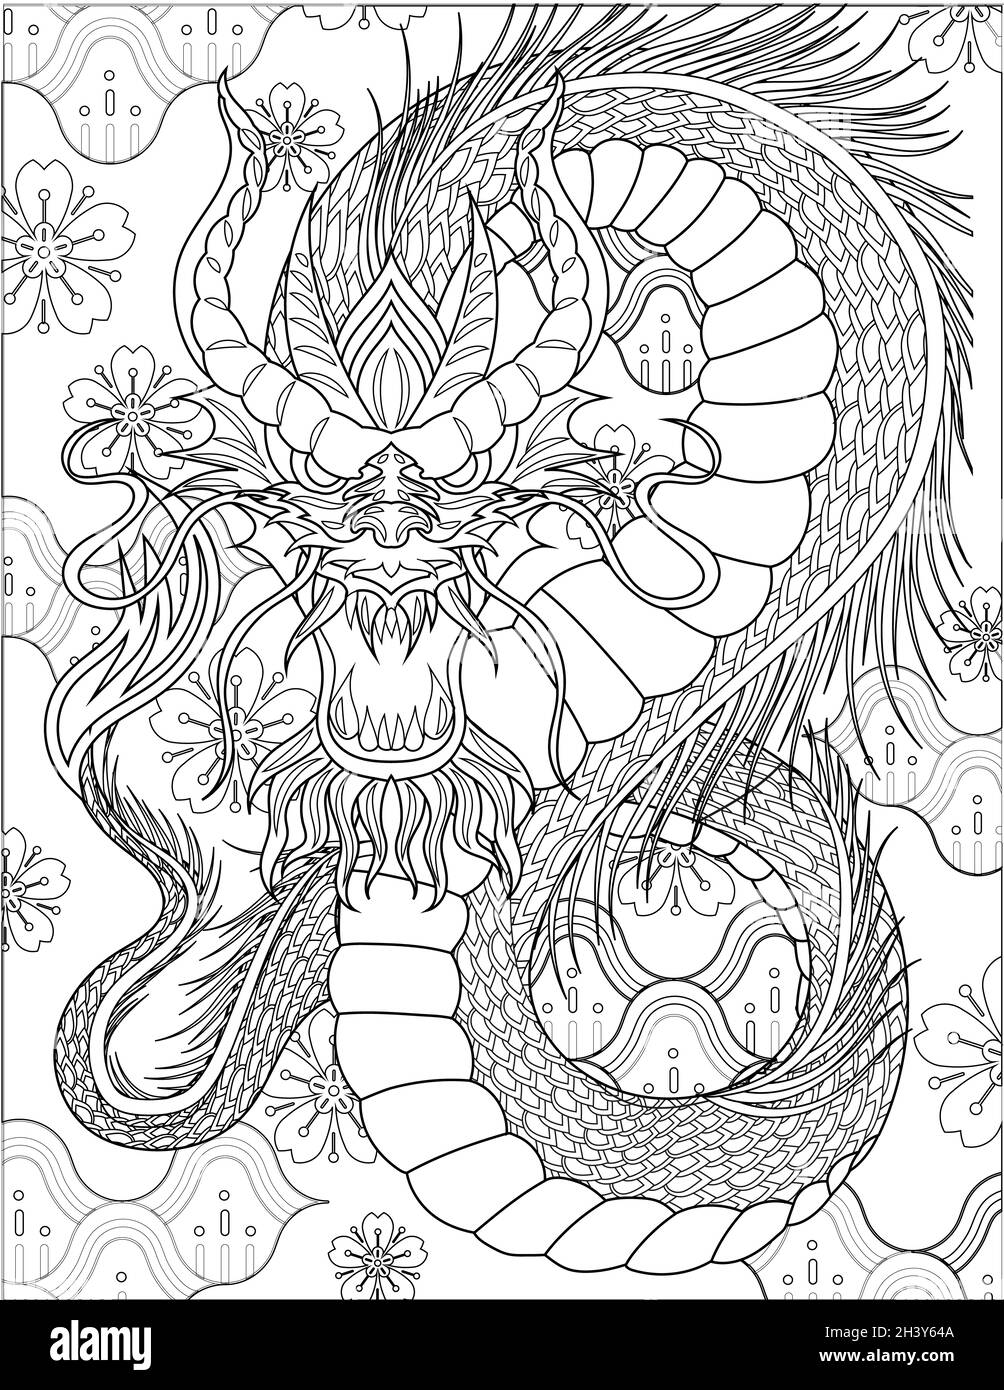 Angry Dragon Facing Front With Long Body And Horns Colorless Line Drawing. Mythical Drake Beast Forward Looking Colorless Line D Stock Photo